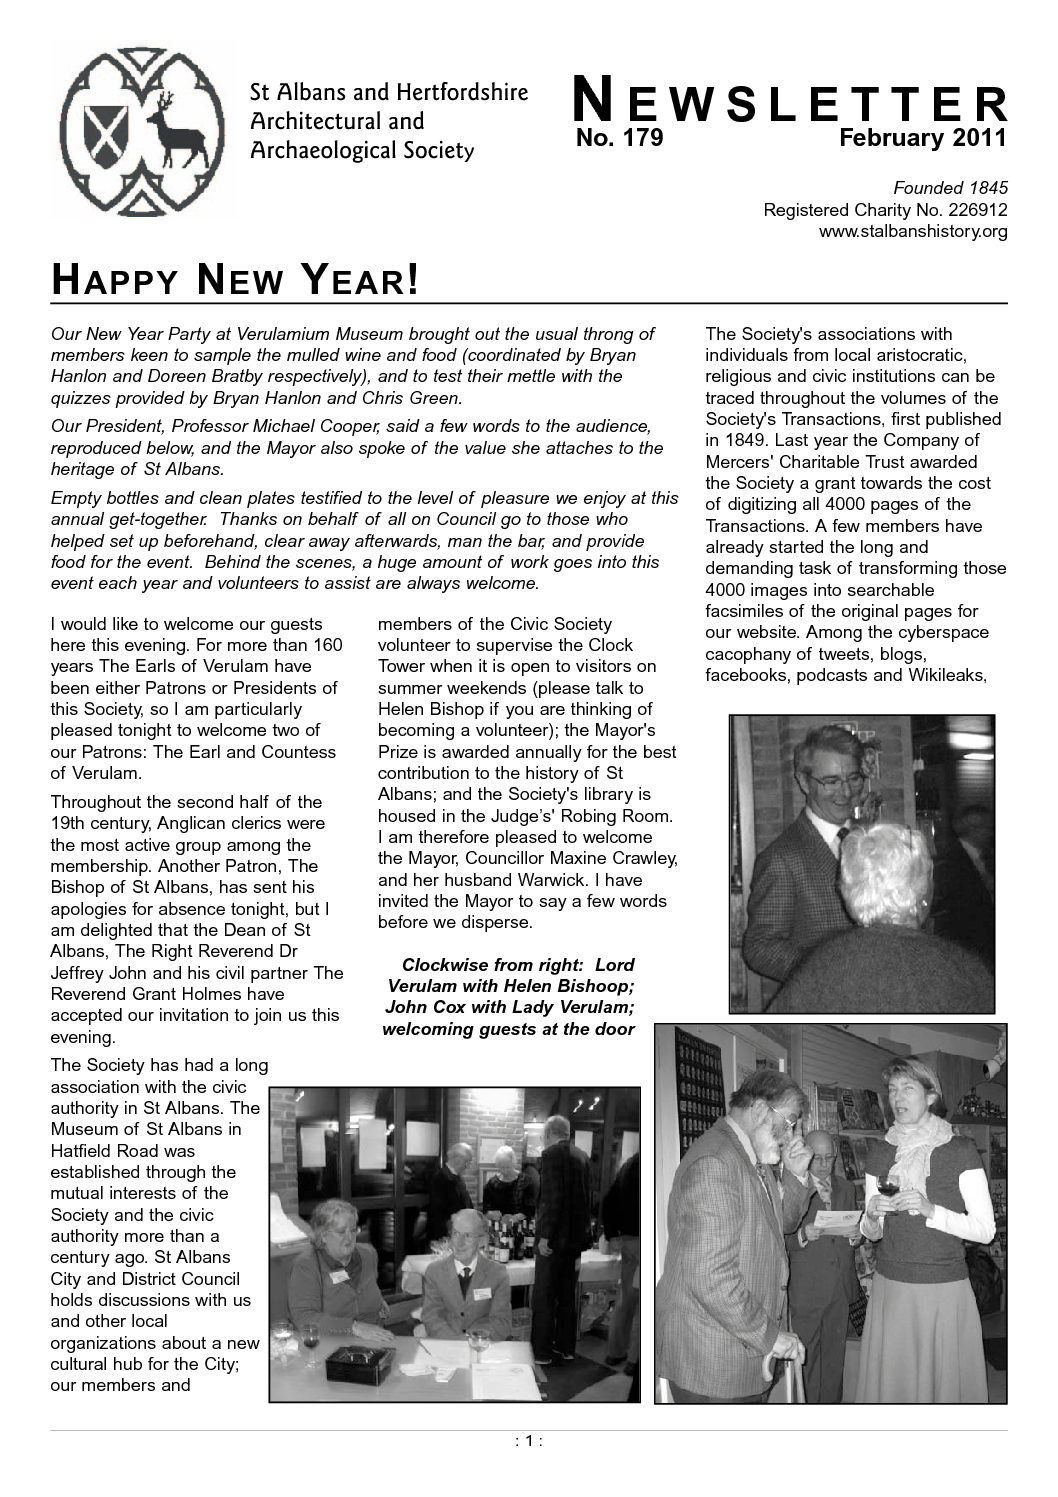 2011 Newsletters